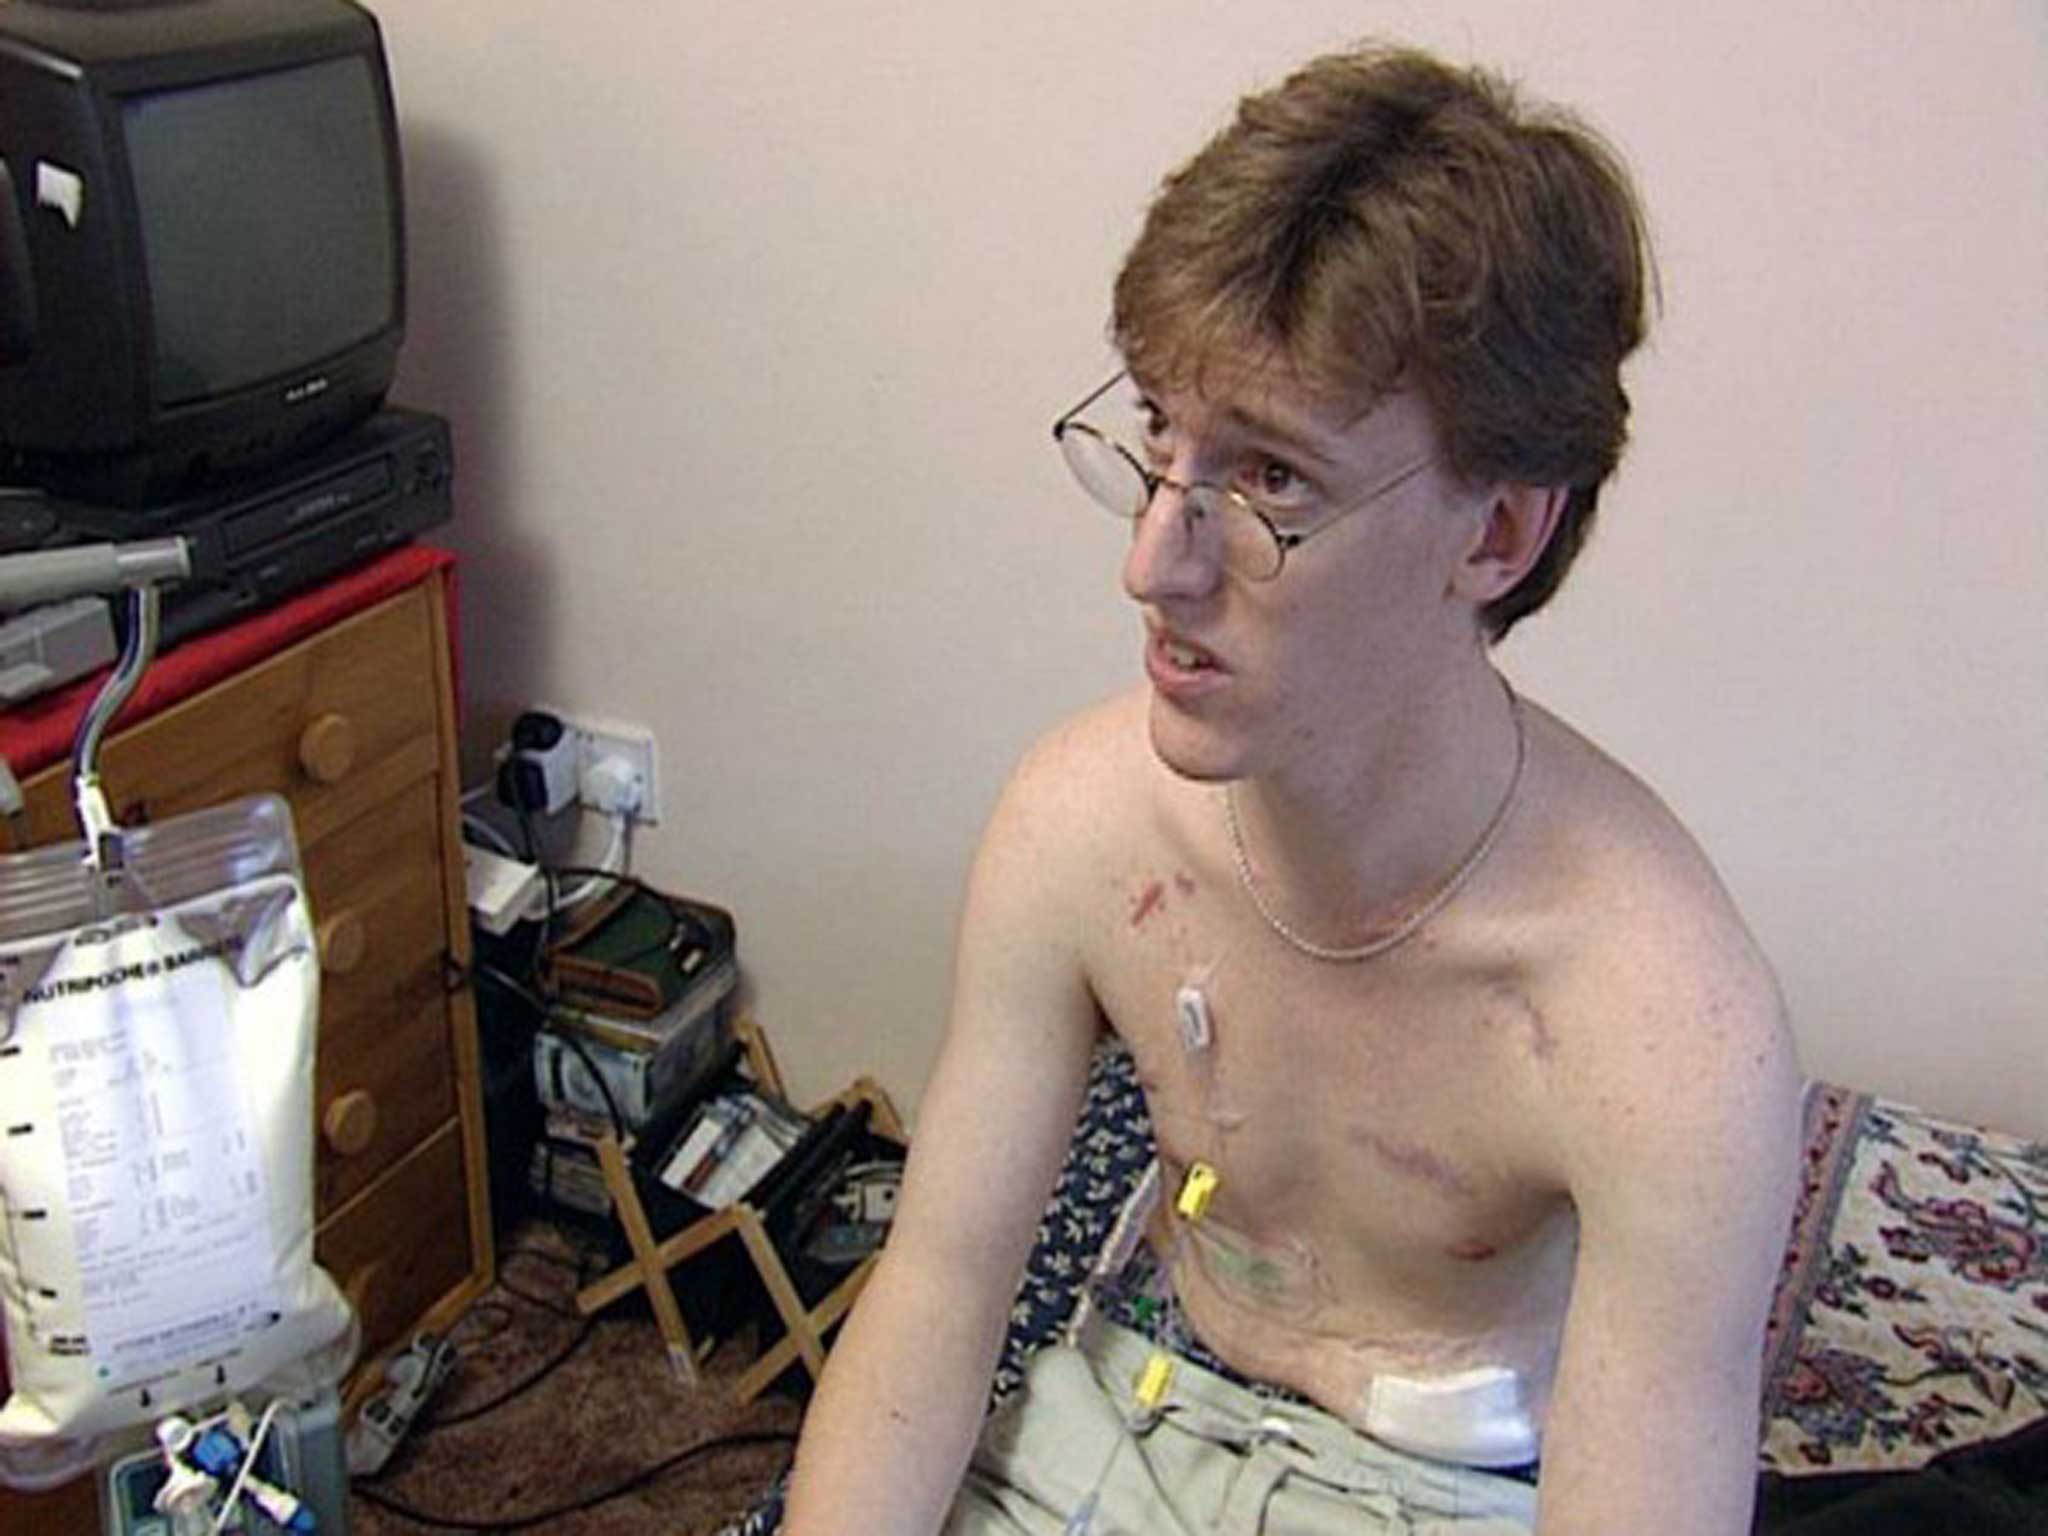 Determined: Danny Bond, seen here in 2001, eventually decided to starve himself to death